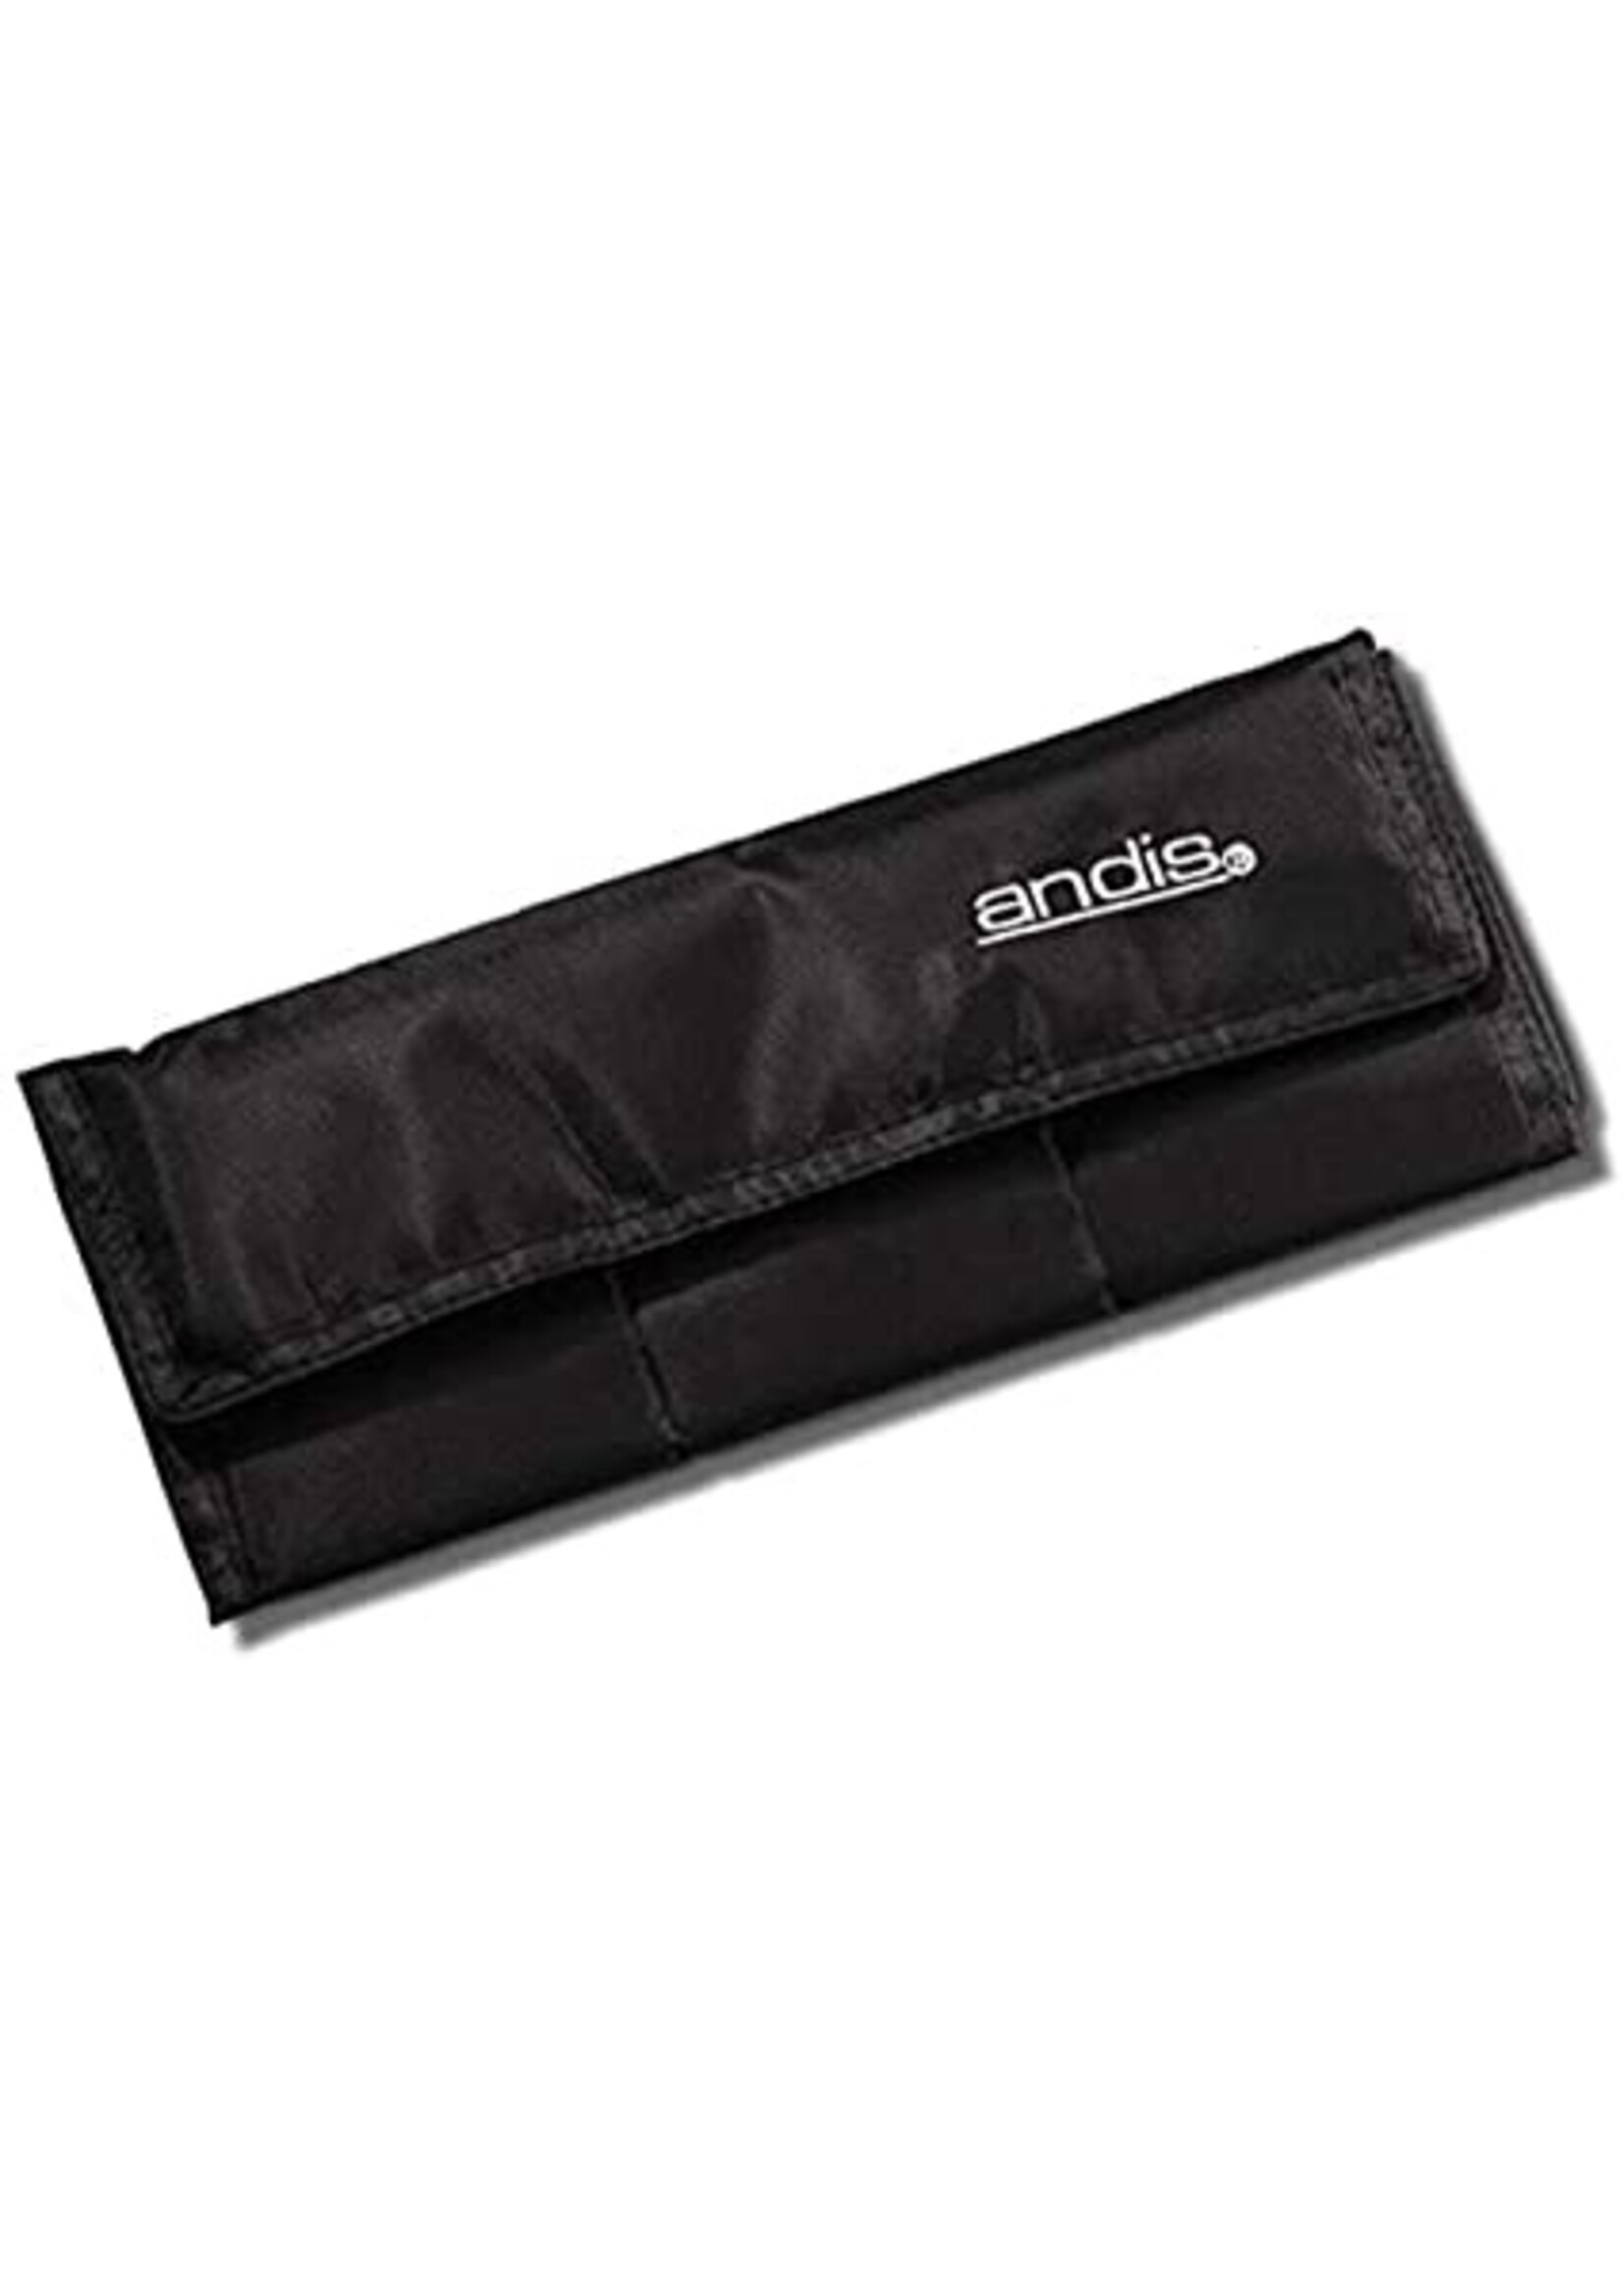 Andis Andis Folding Blade Case